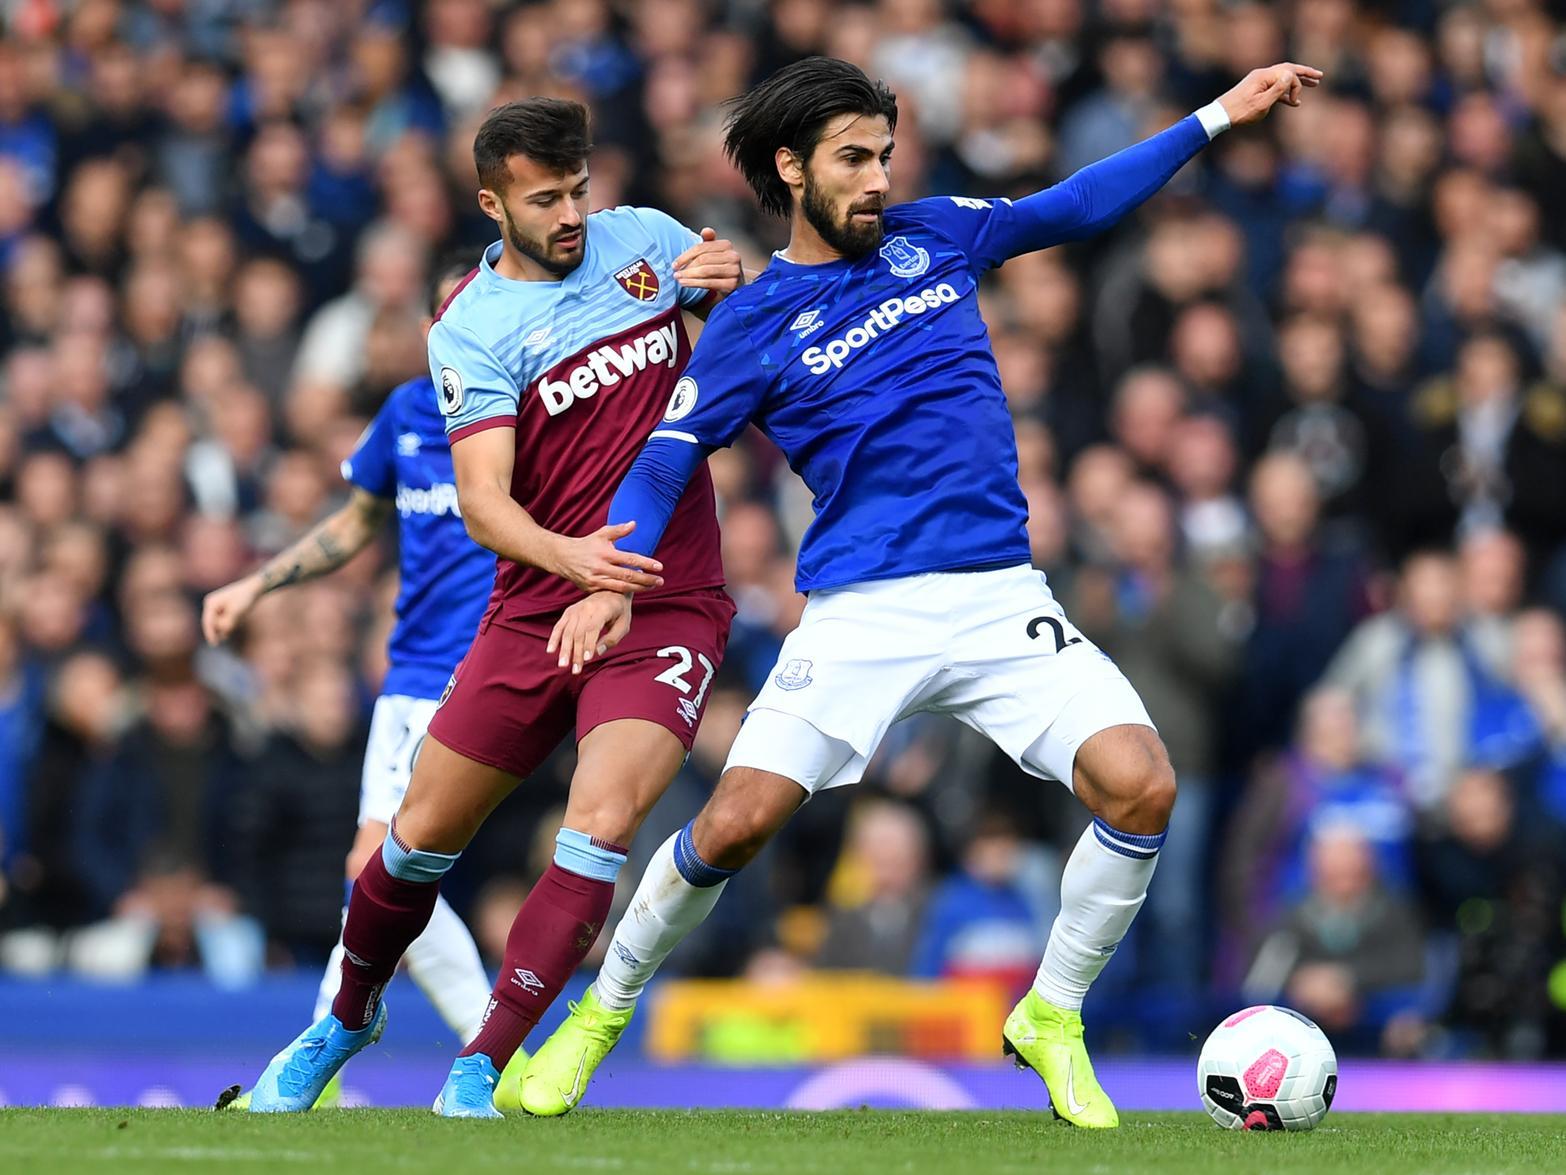 The Toffees haven't beaten the Gunners on the road since 1996, and they'll be hard-pushed to end that record this weekend. Still, the return of Andre Gomes from a serious ankle injury will be a real boost for his side.